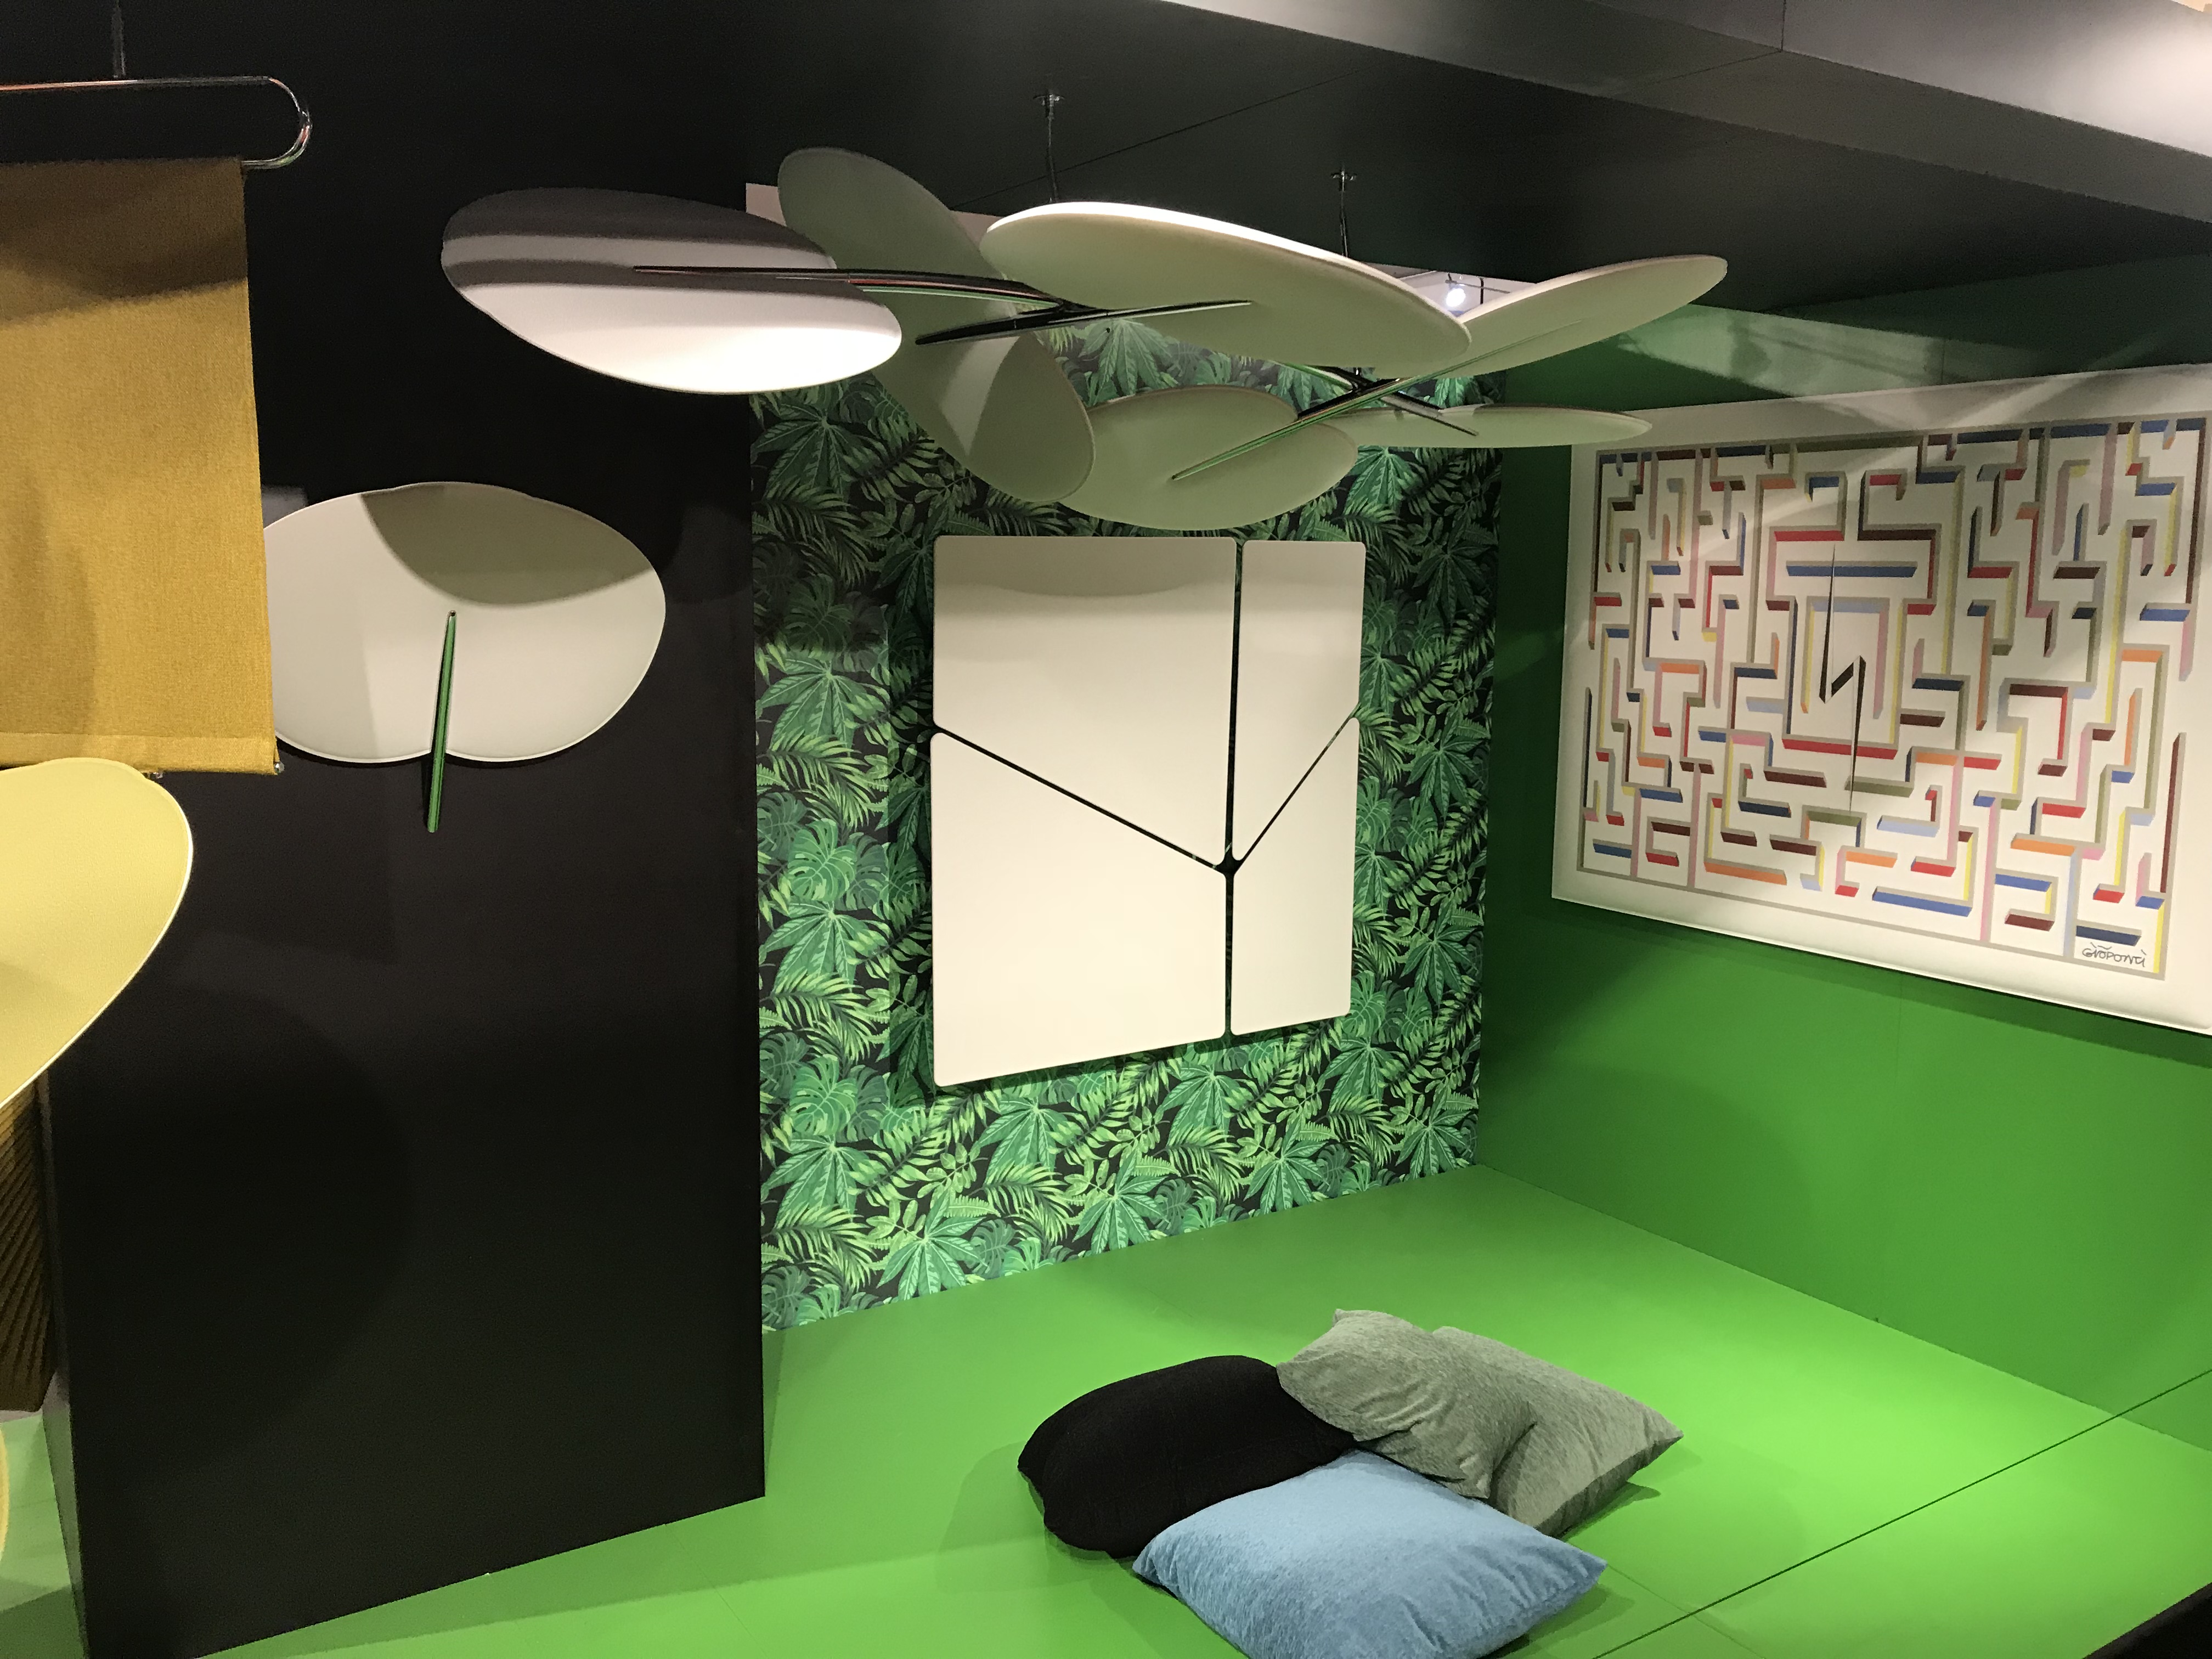 At NeoCon 2018: Snowsound offers Sound Solutions